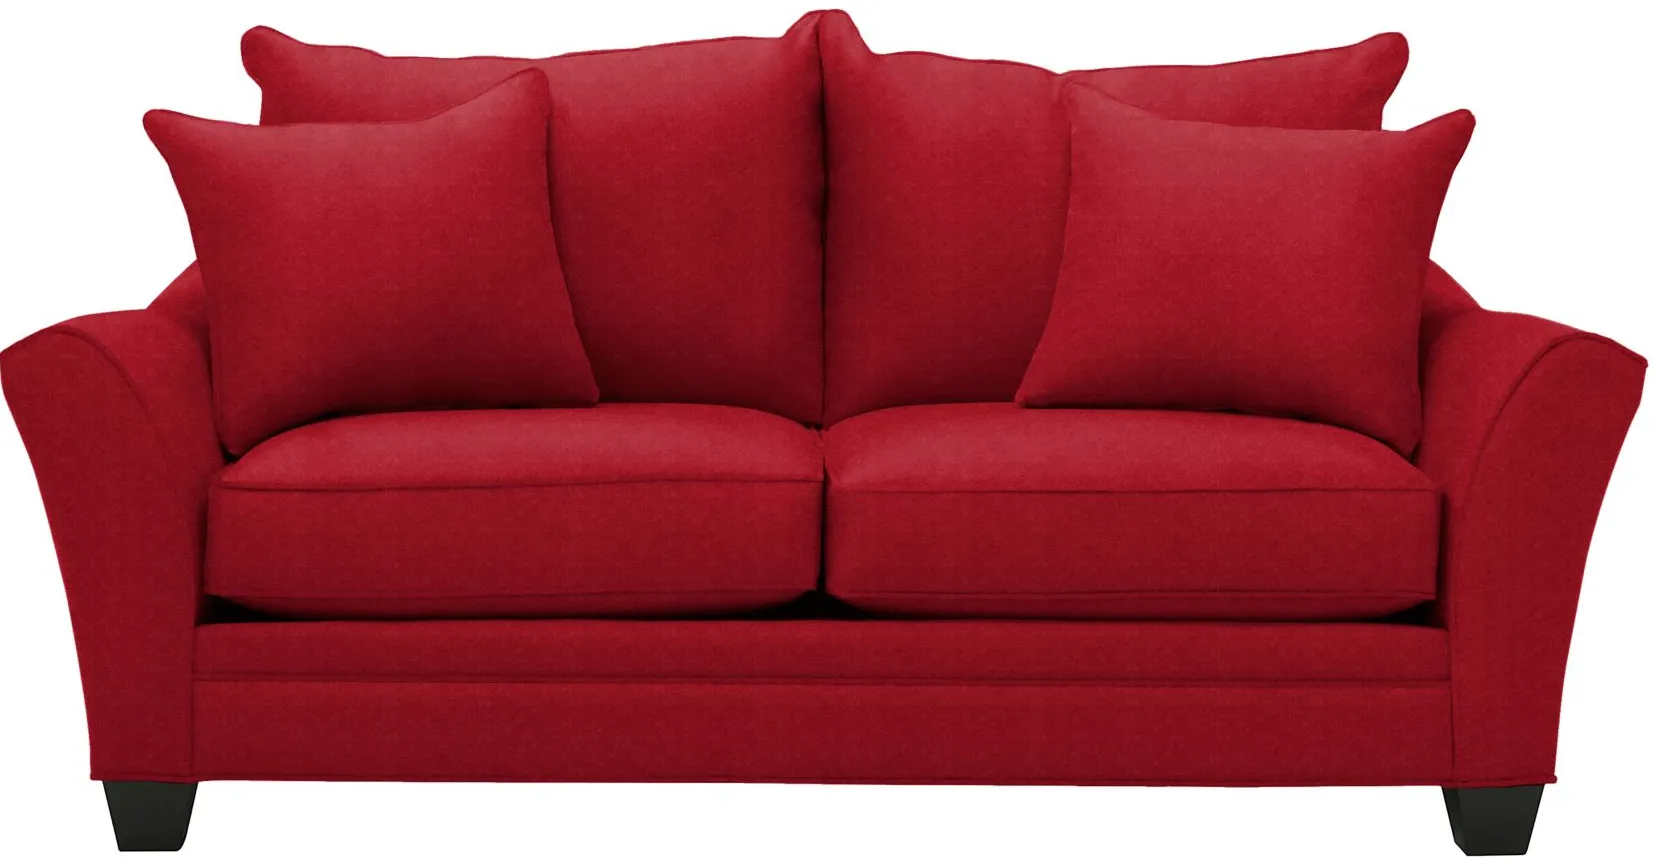 Briarwood Apartment Sleeper Sofa in Suede So Soft Cardinal by H.M. Richards